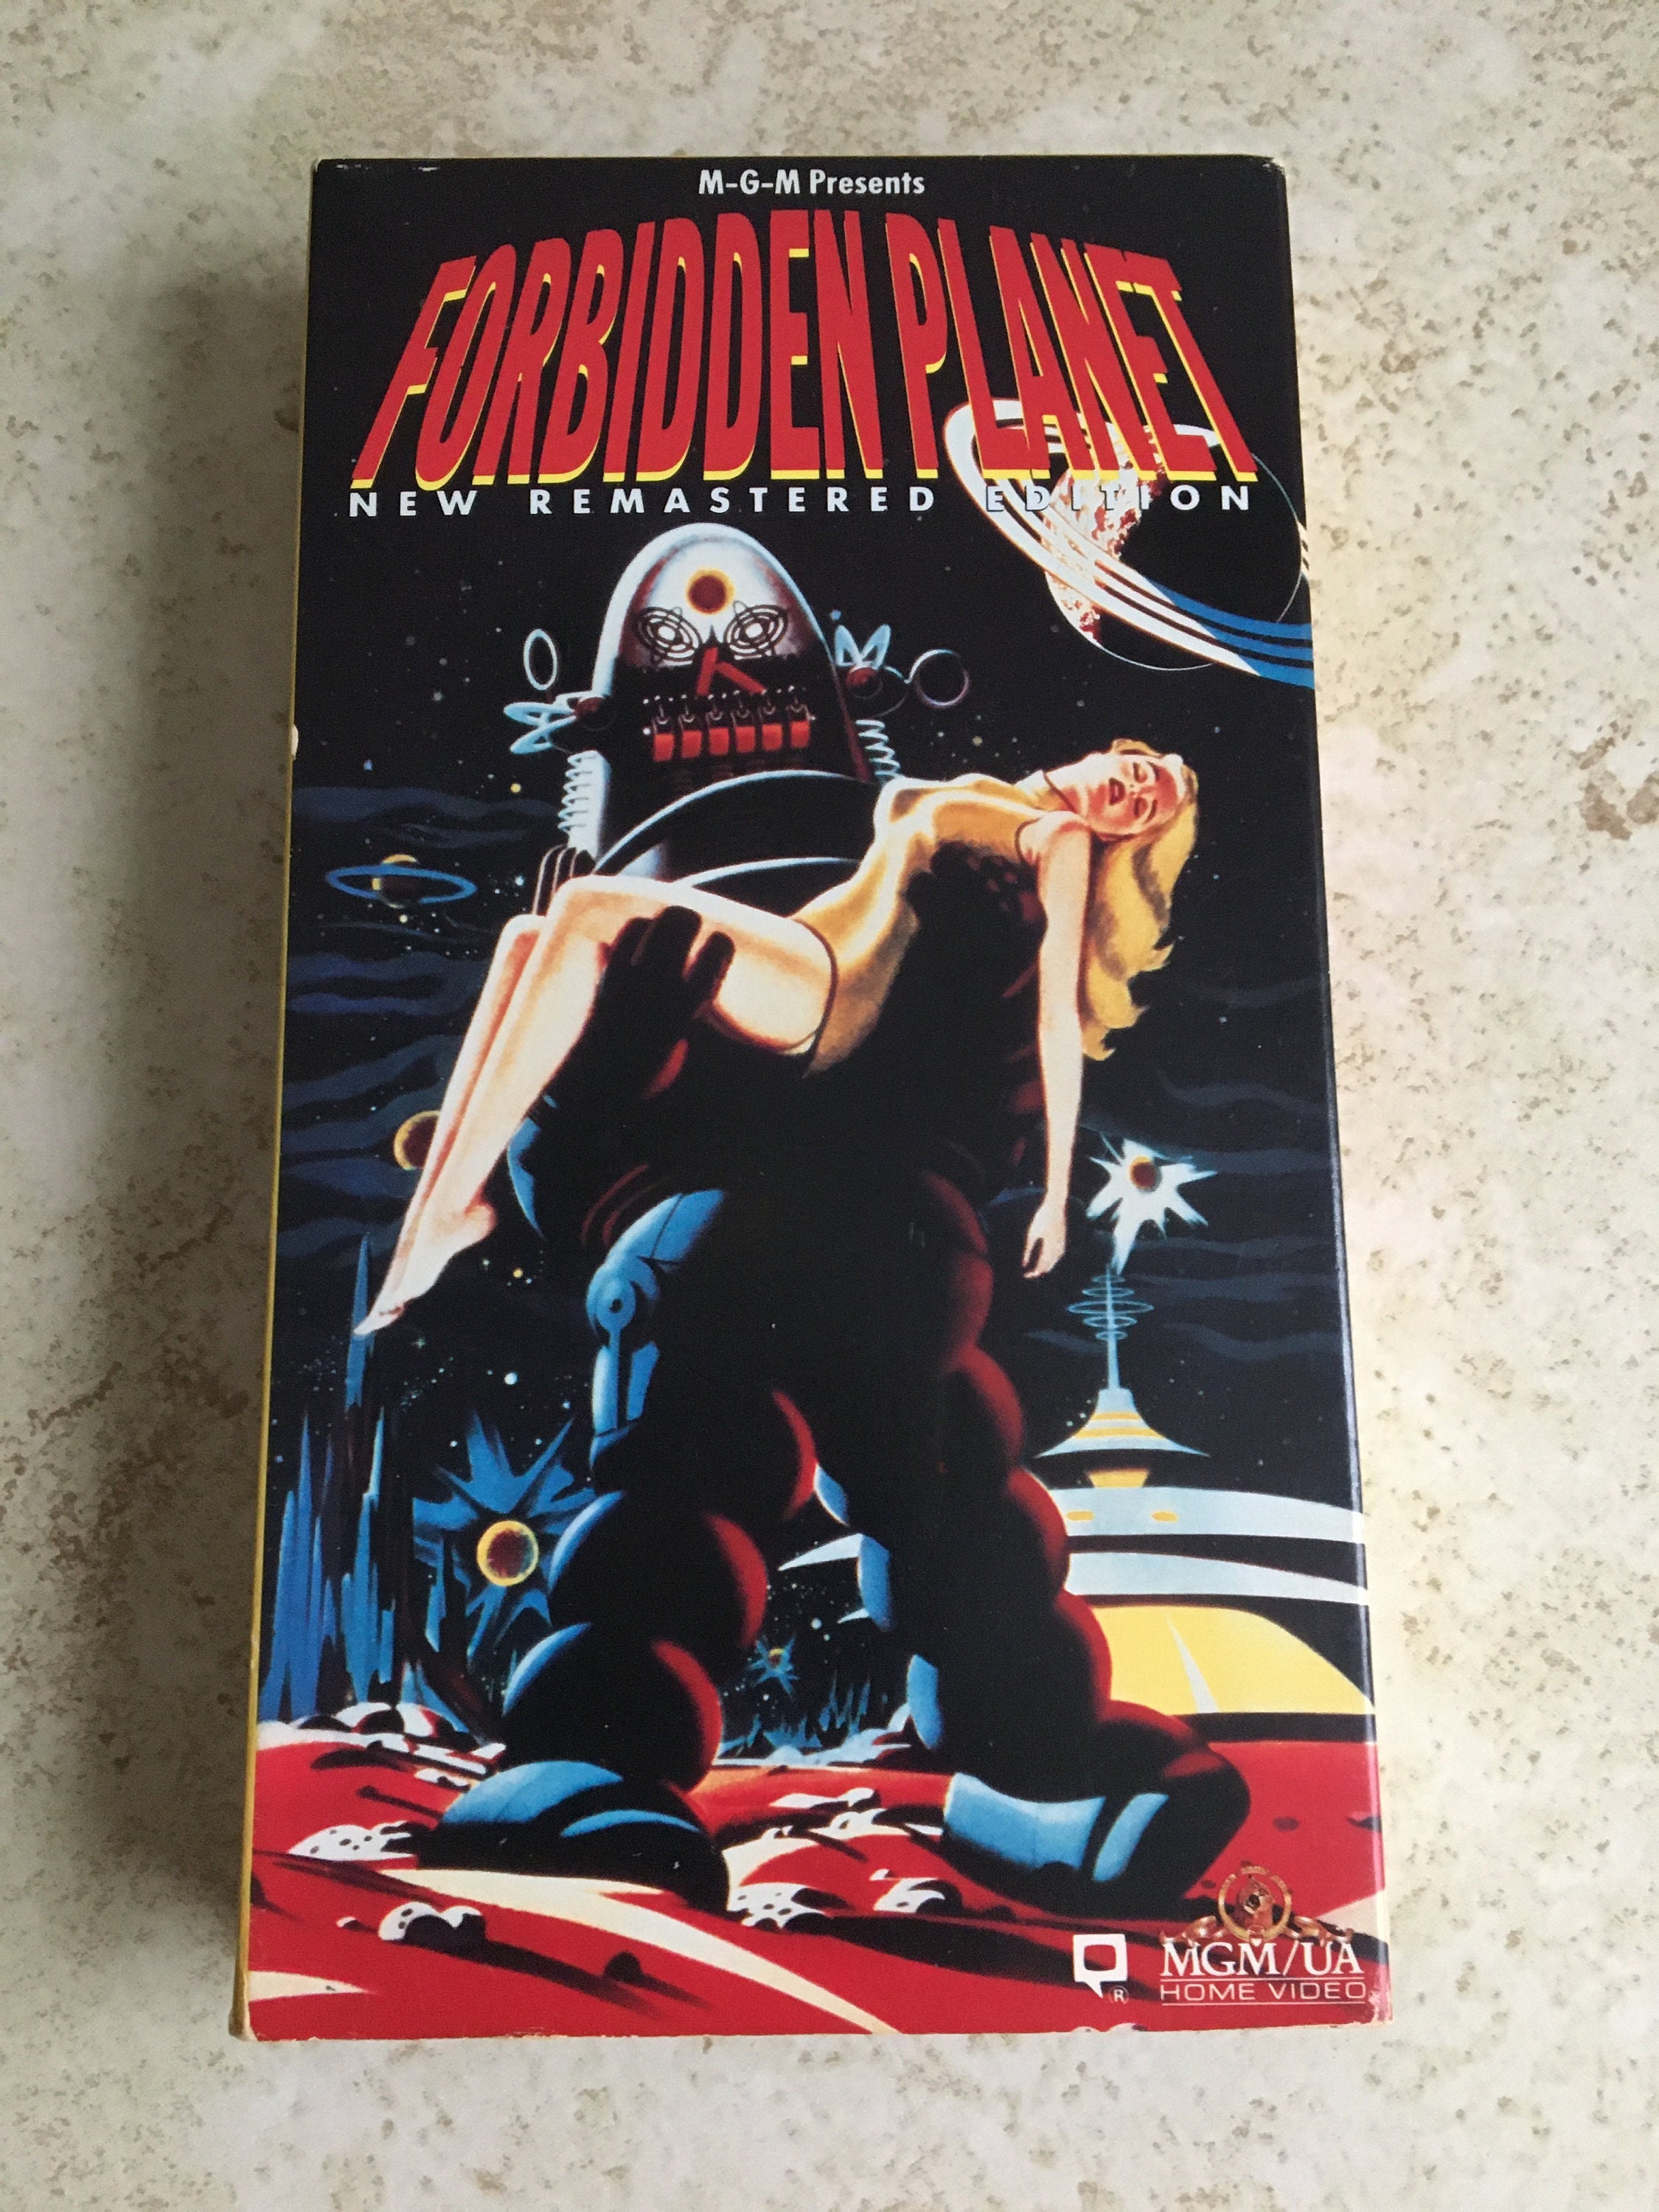 Forbidden Planet (MGM VHS Oversized Case)